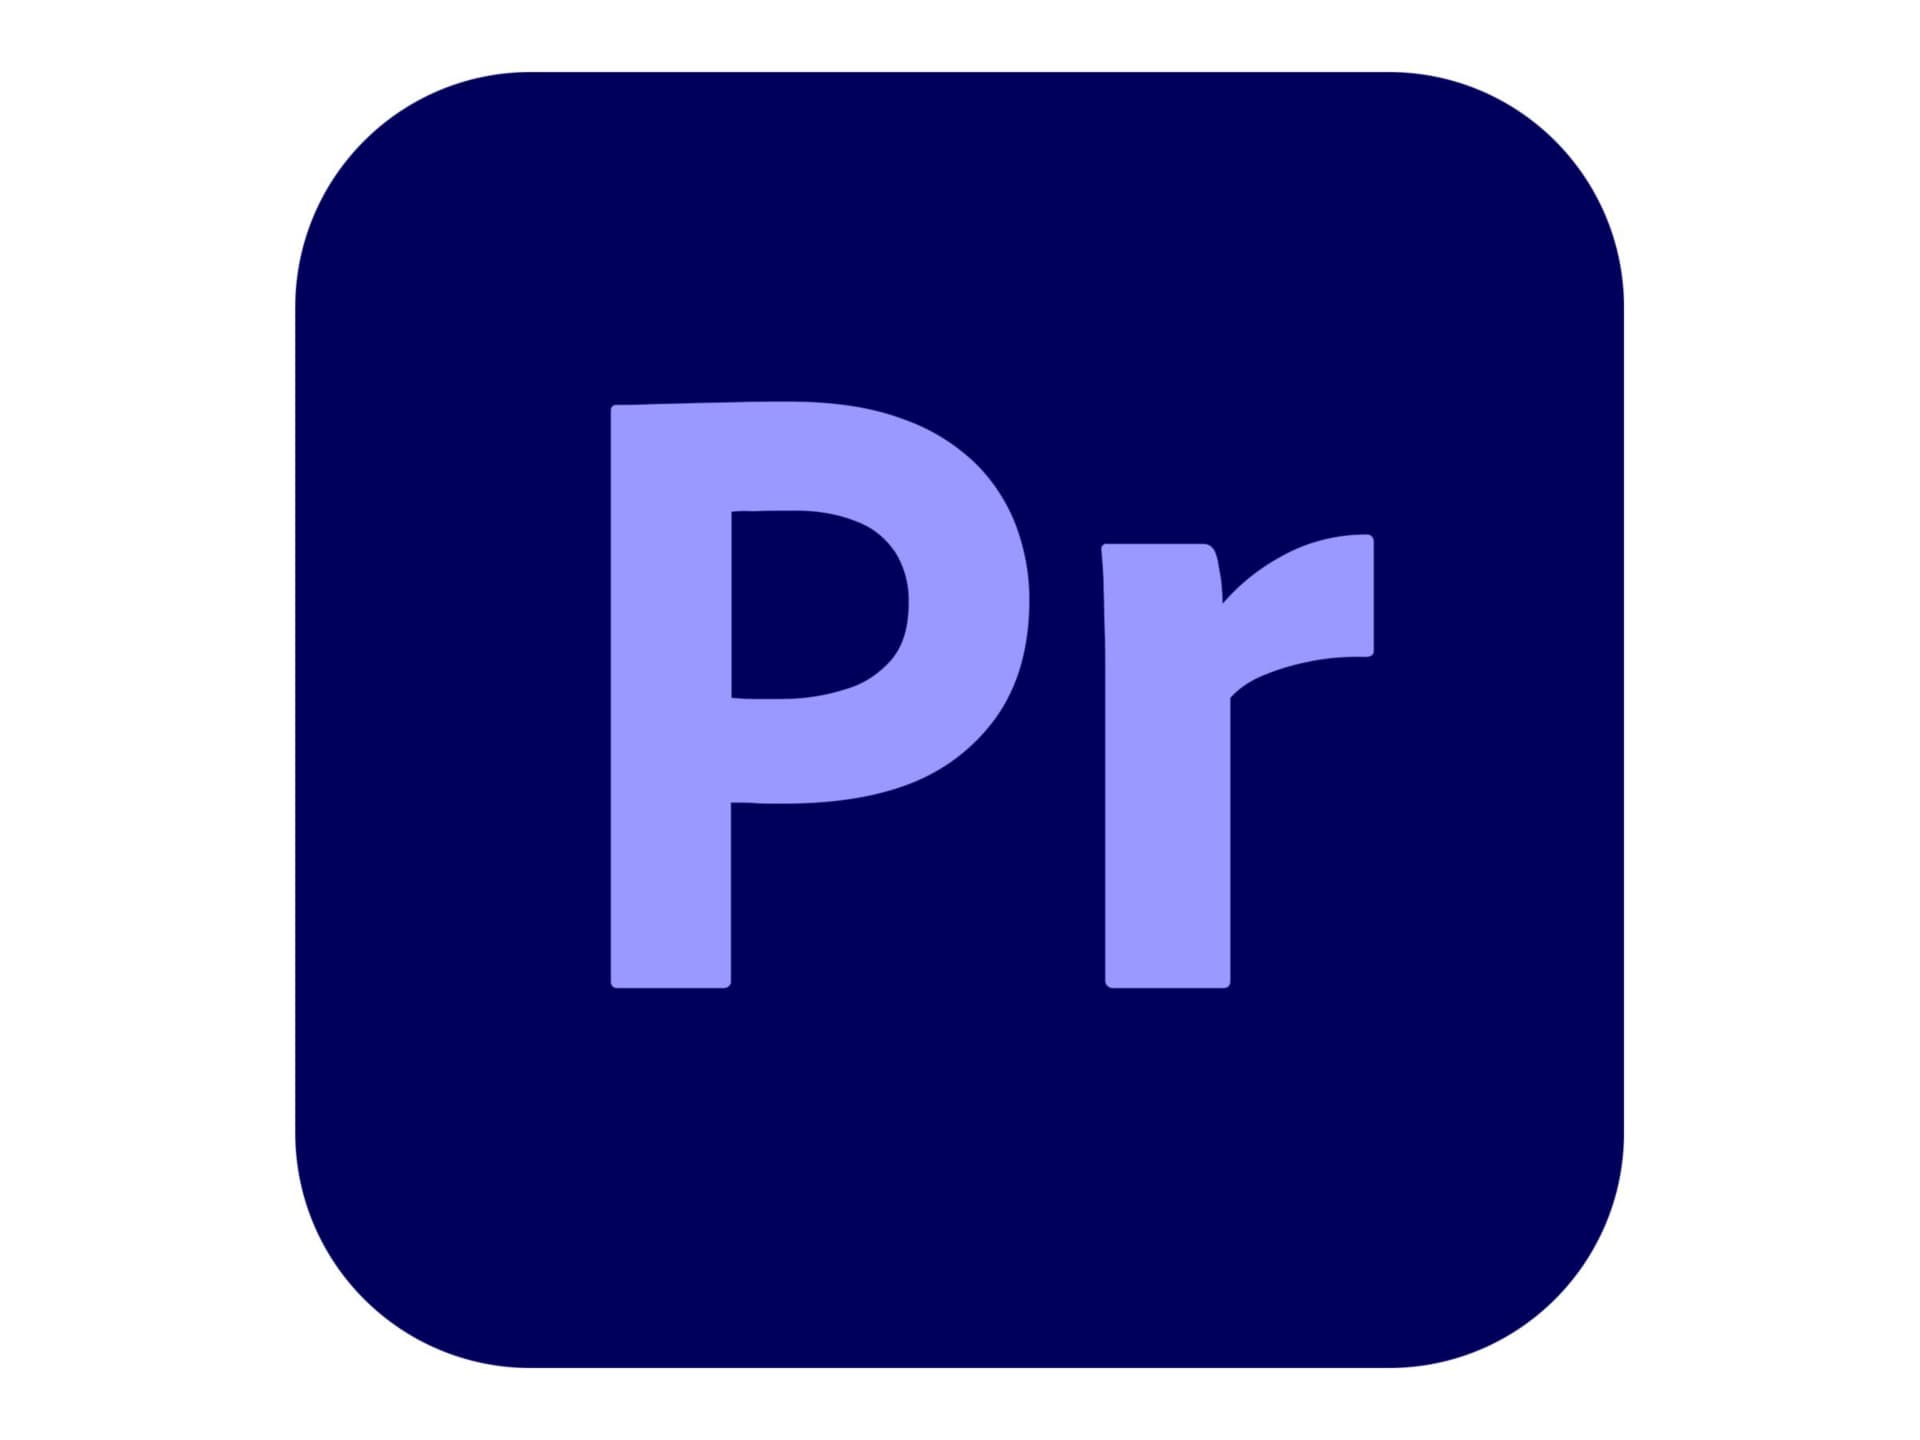 Adobe Premiere Pro CC for teams - Subscription New (1 month) - 1 named user